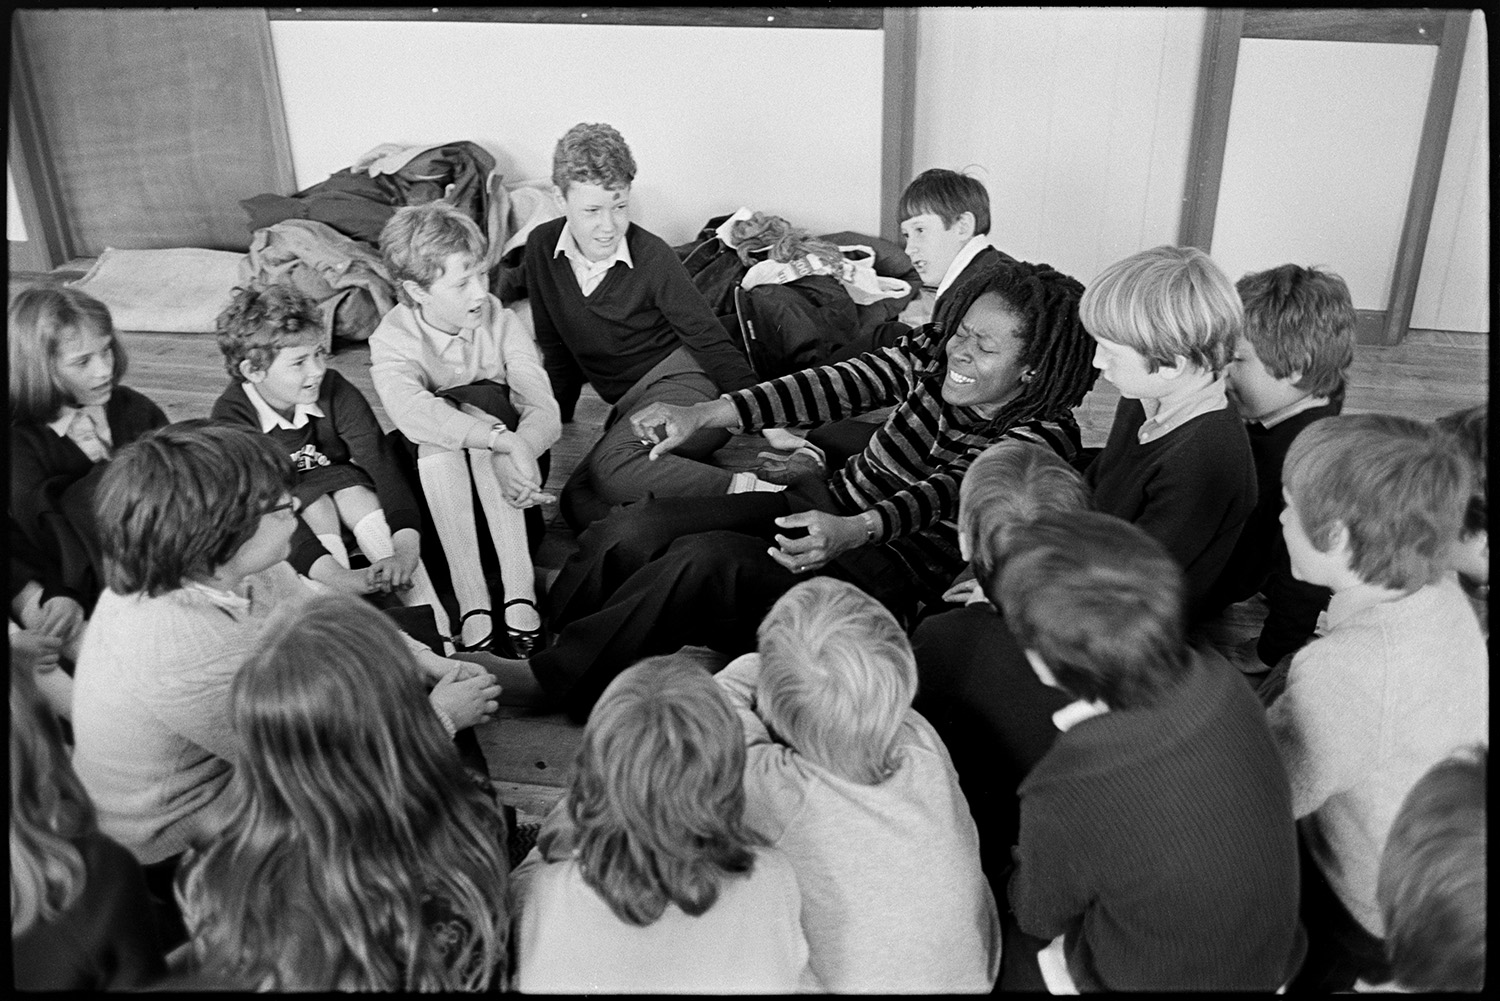 Caribbean woman writer in primary school telling stories to children. 
[Pearl Springer, a Caribbean writer, telling a story to a group of schoolchildren sat on the floor of a school hall in High Bickington. She is acting part of the story.]